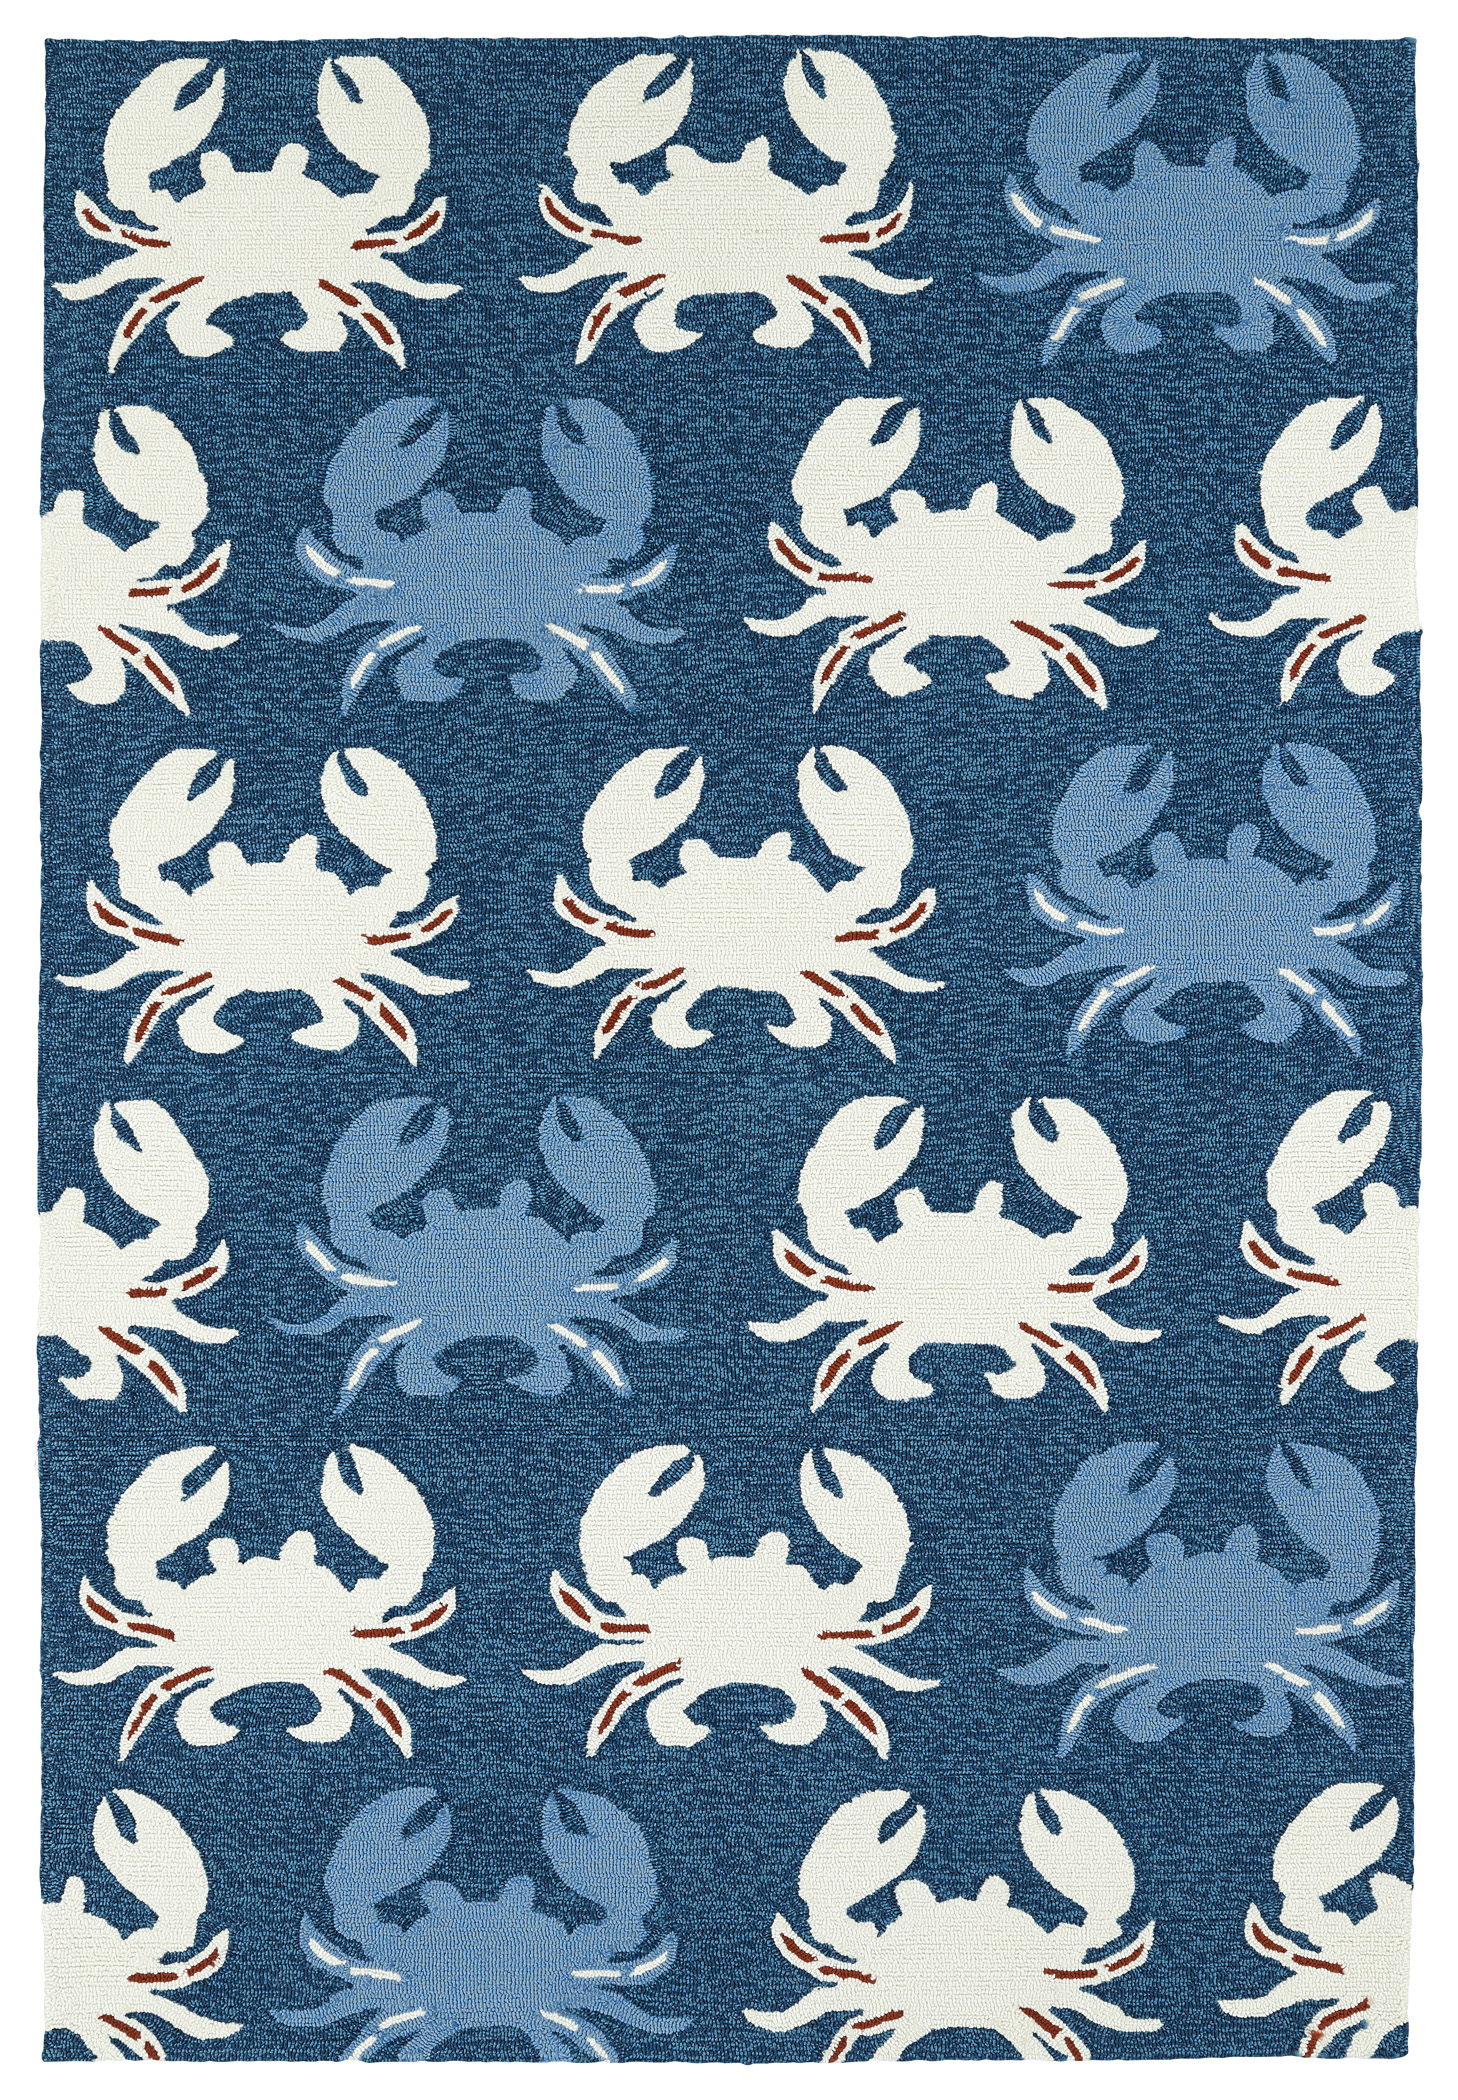 blue crab rug from Kaleen